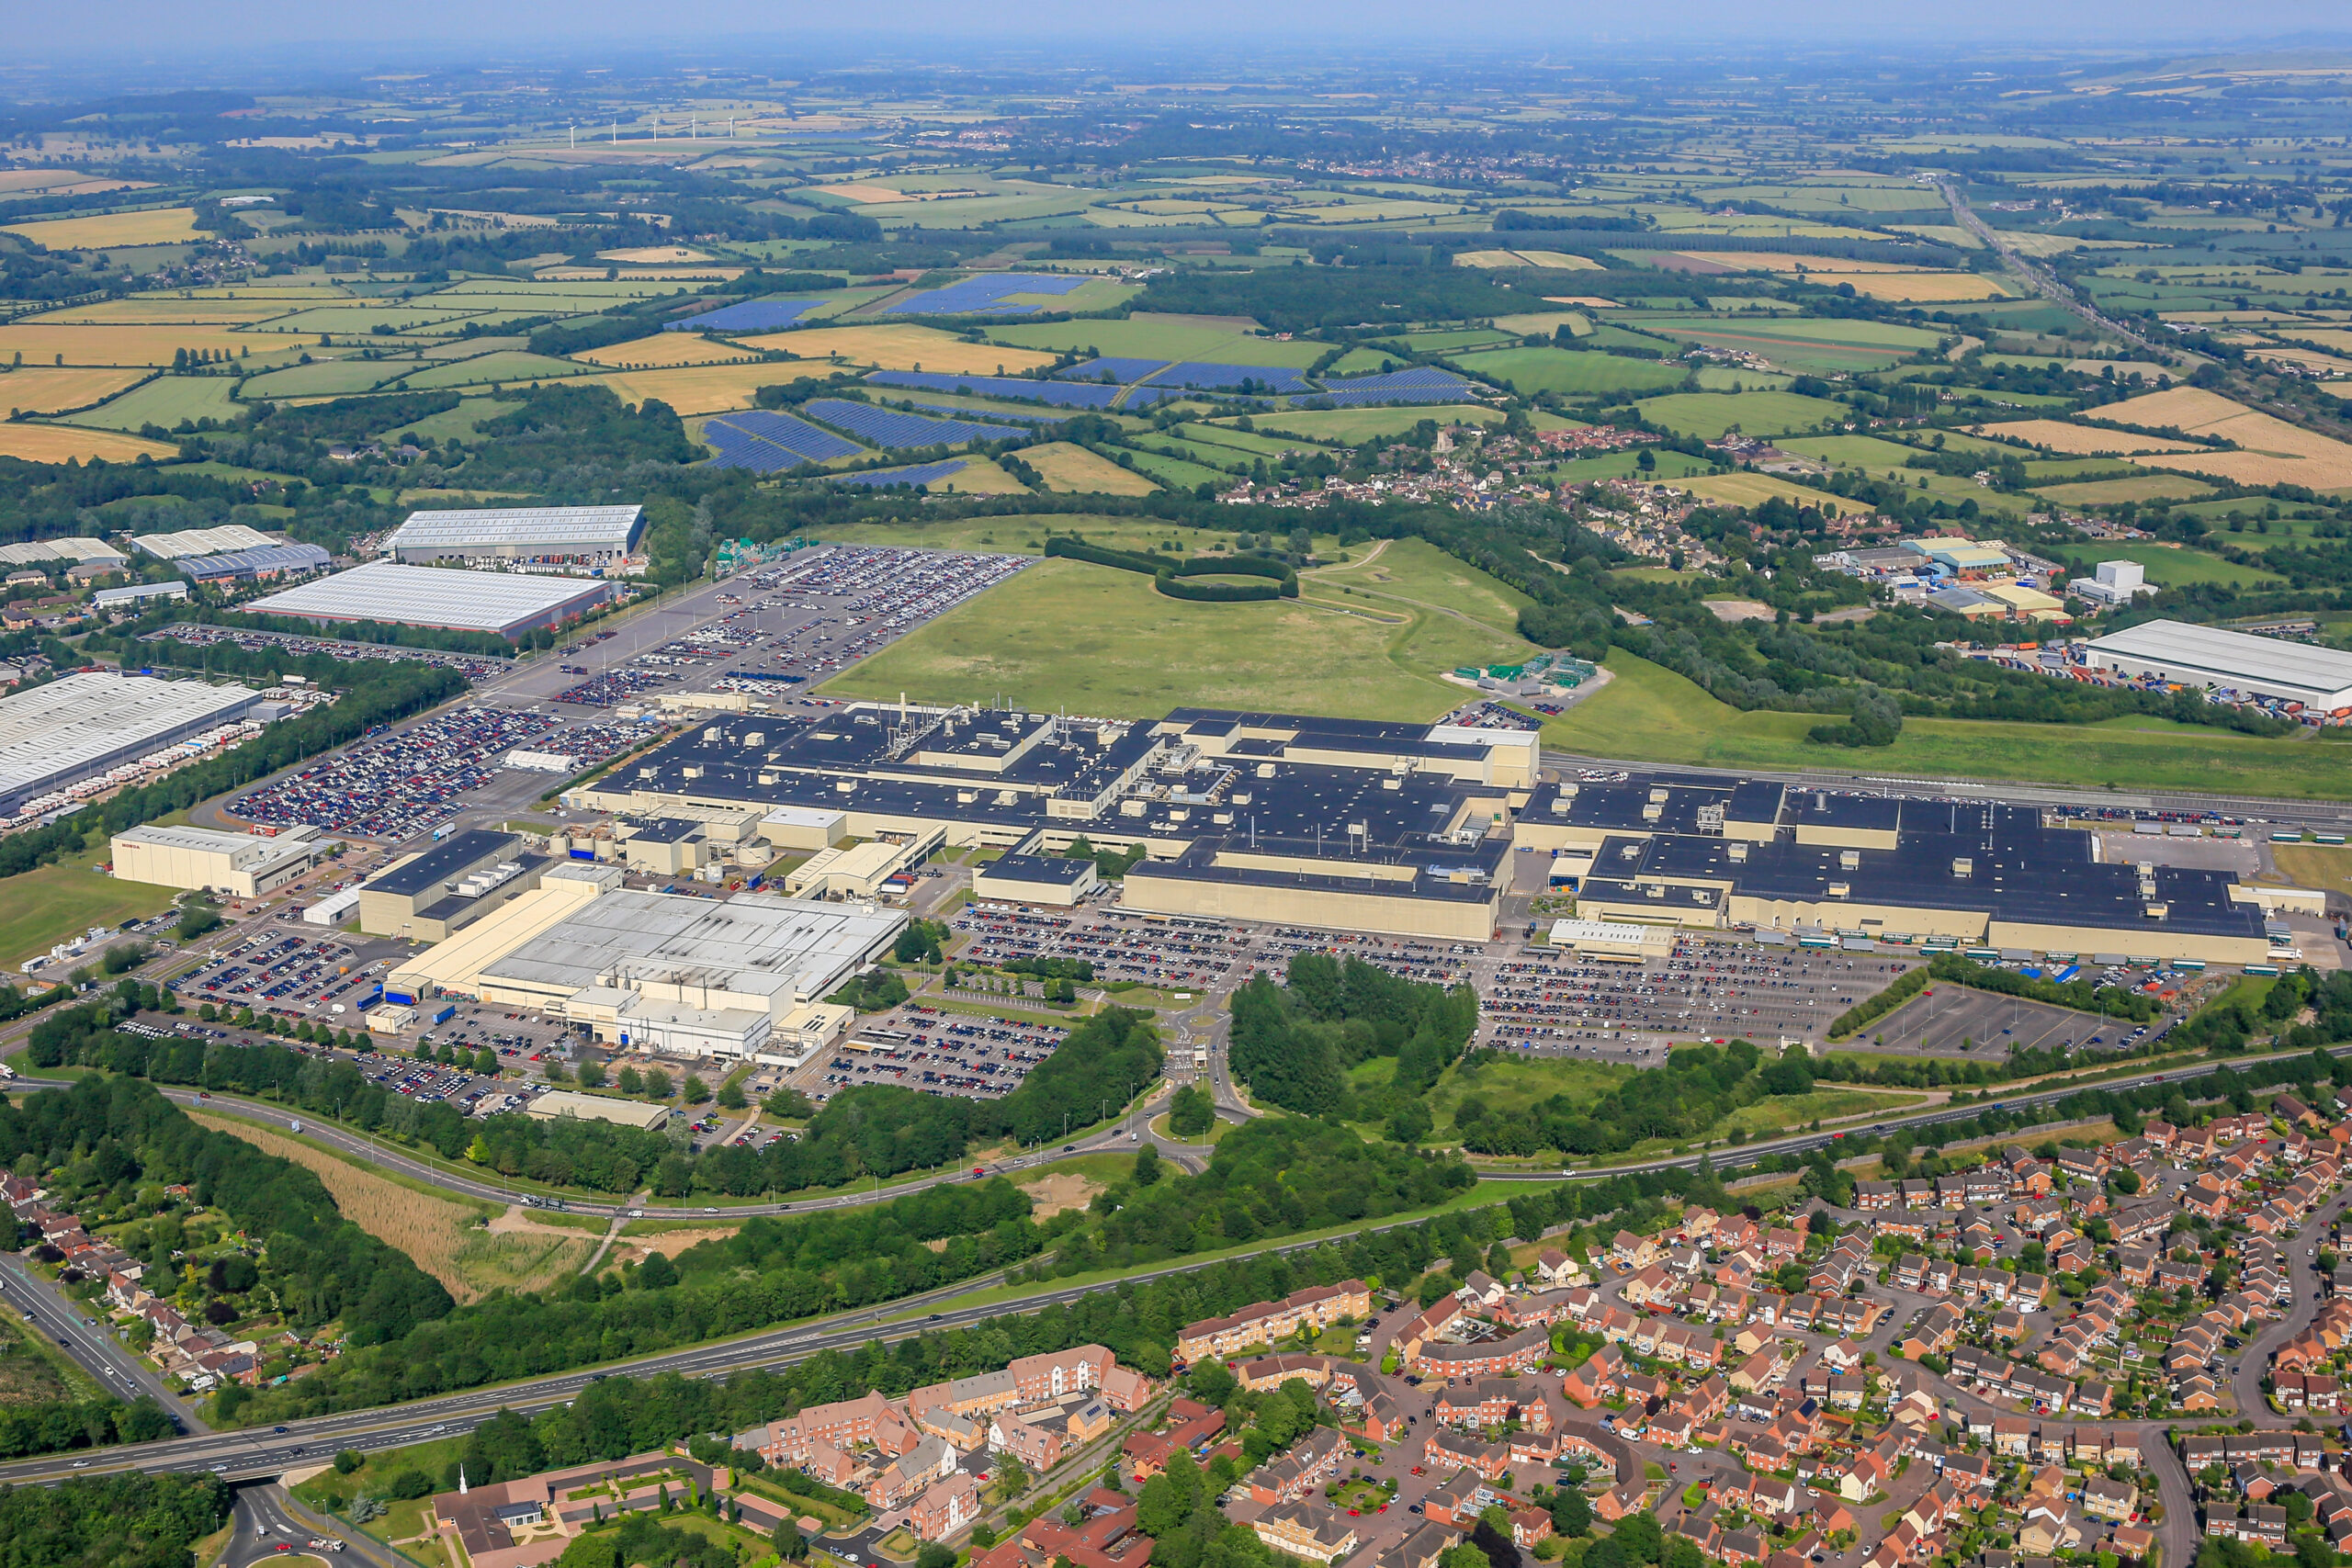 Panattoni plans to invest £700m in one of its largest logistics schemes to date after buying the former Honda plant in Swindon